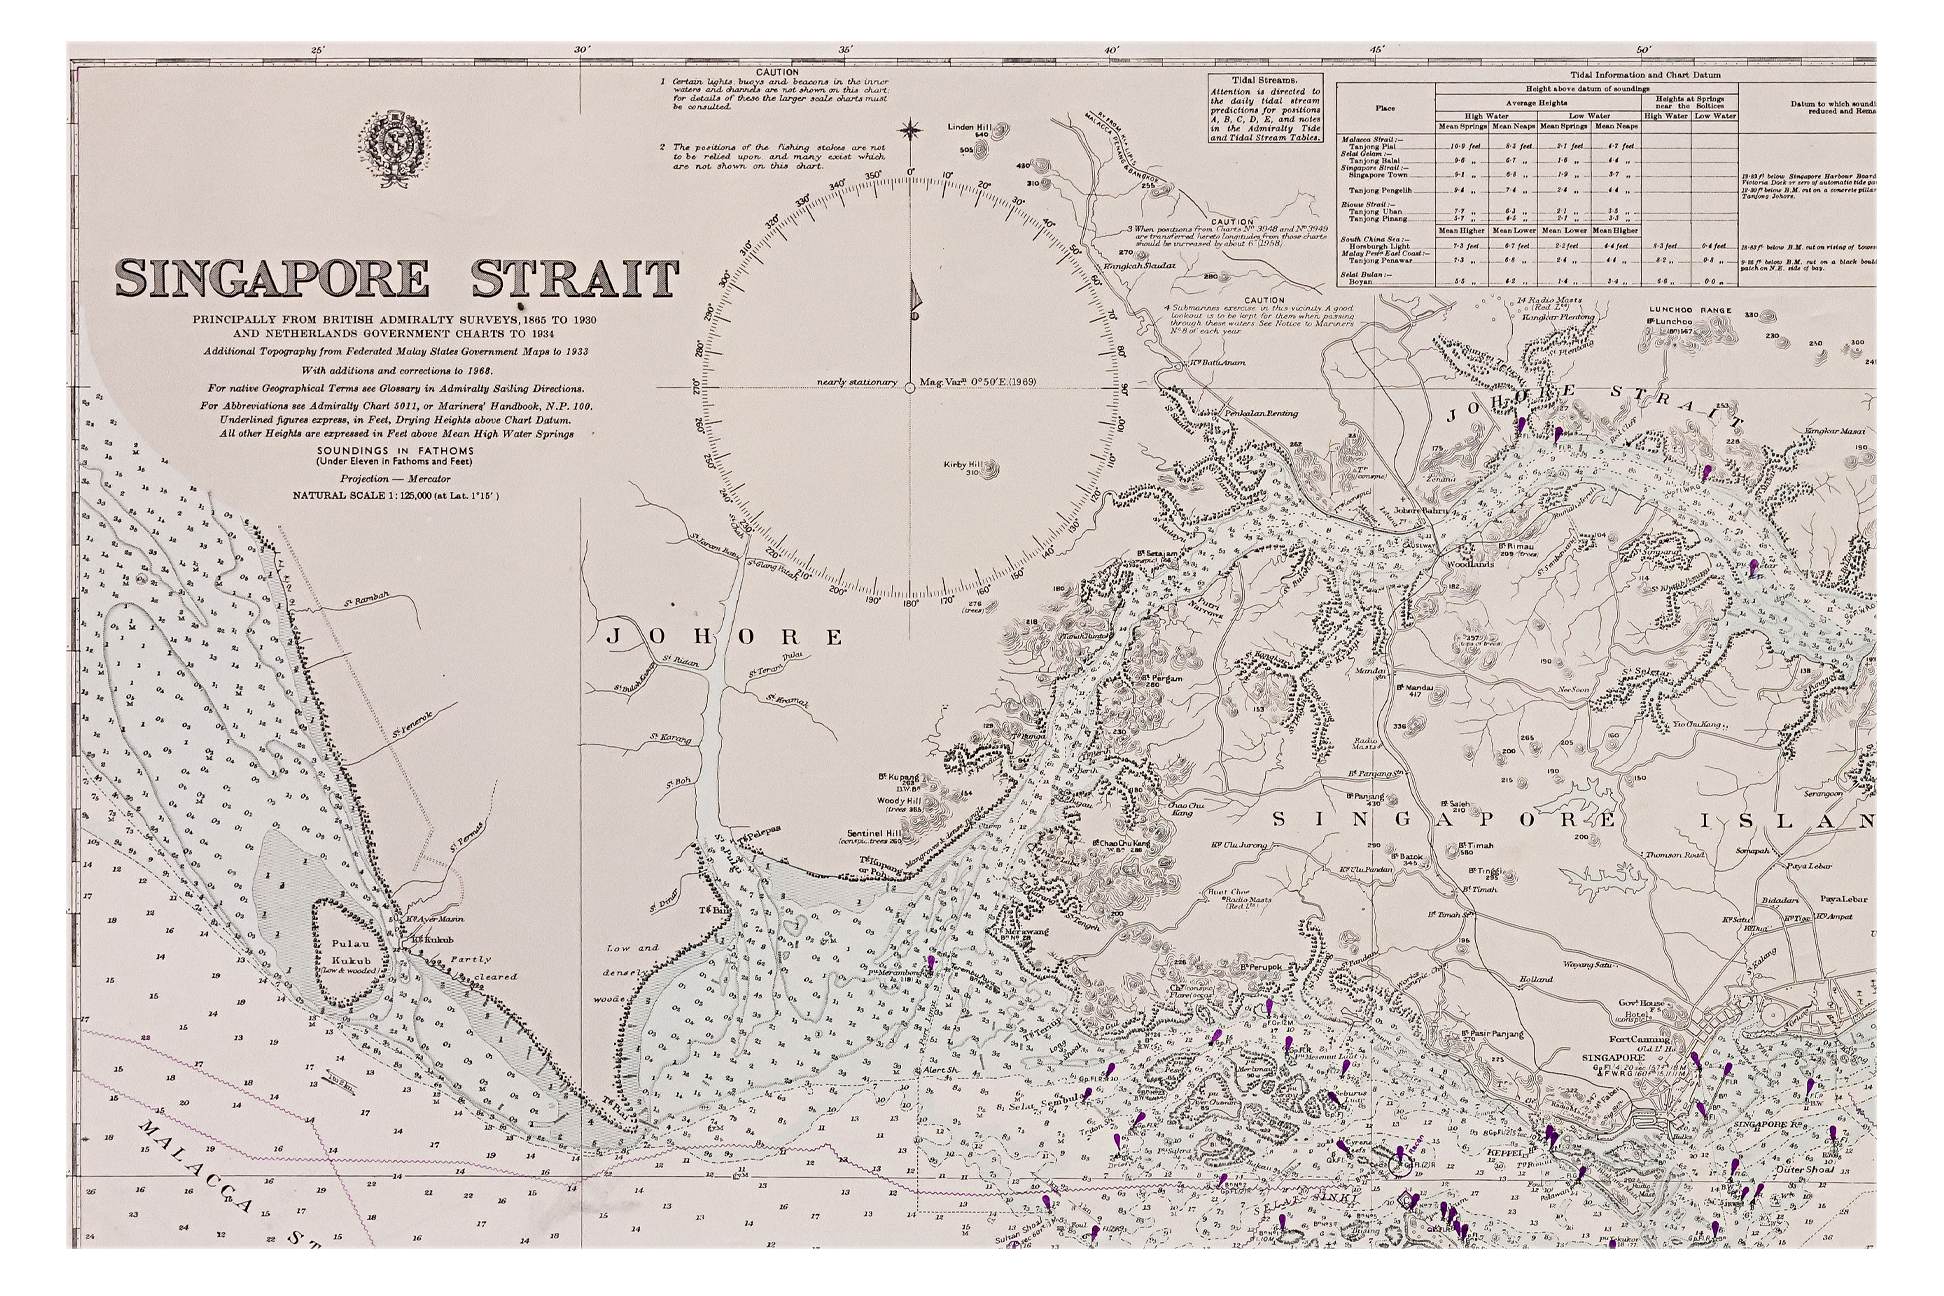 A LARGE MAP OF THE SINGAPORE STRAIT - Image 2 of 2